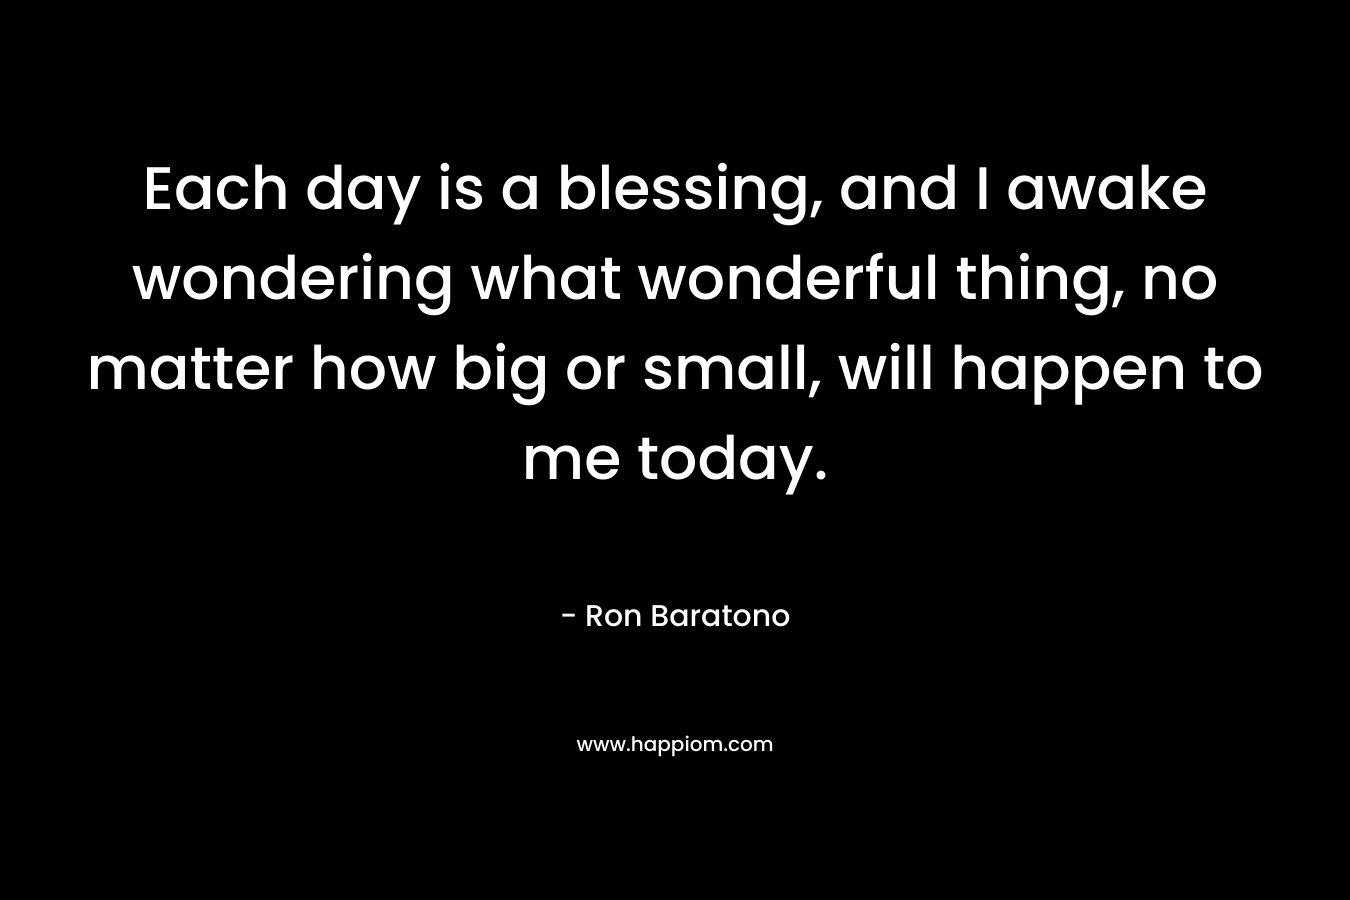 Each day is a blessing, and I awake wondering what wonderful thing, no matter how big or small, will happen to me today. – Ron Baratono